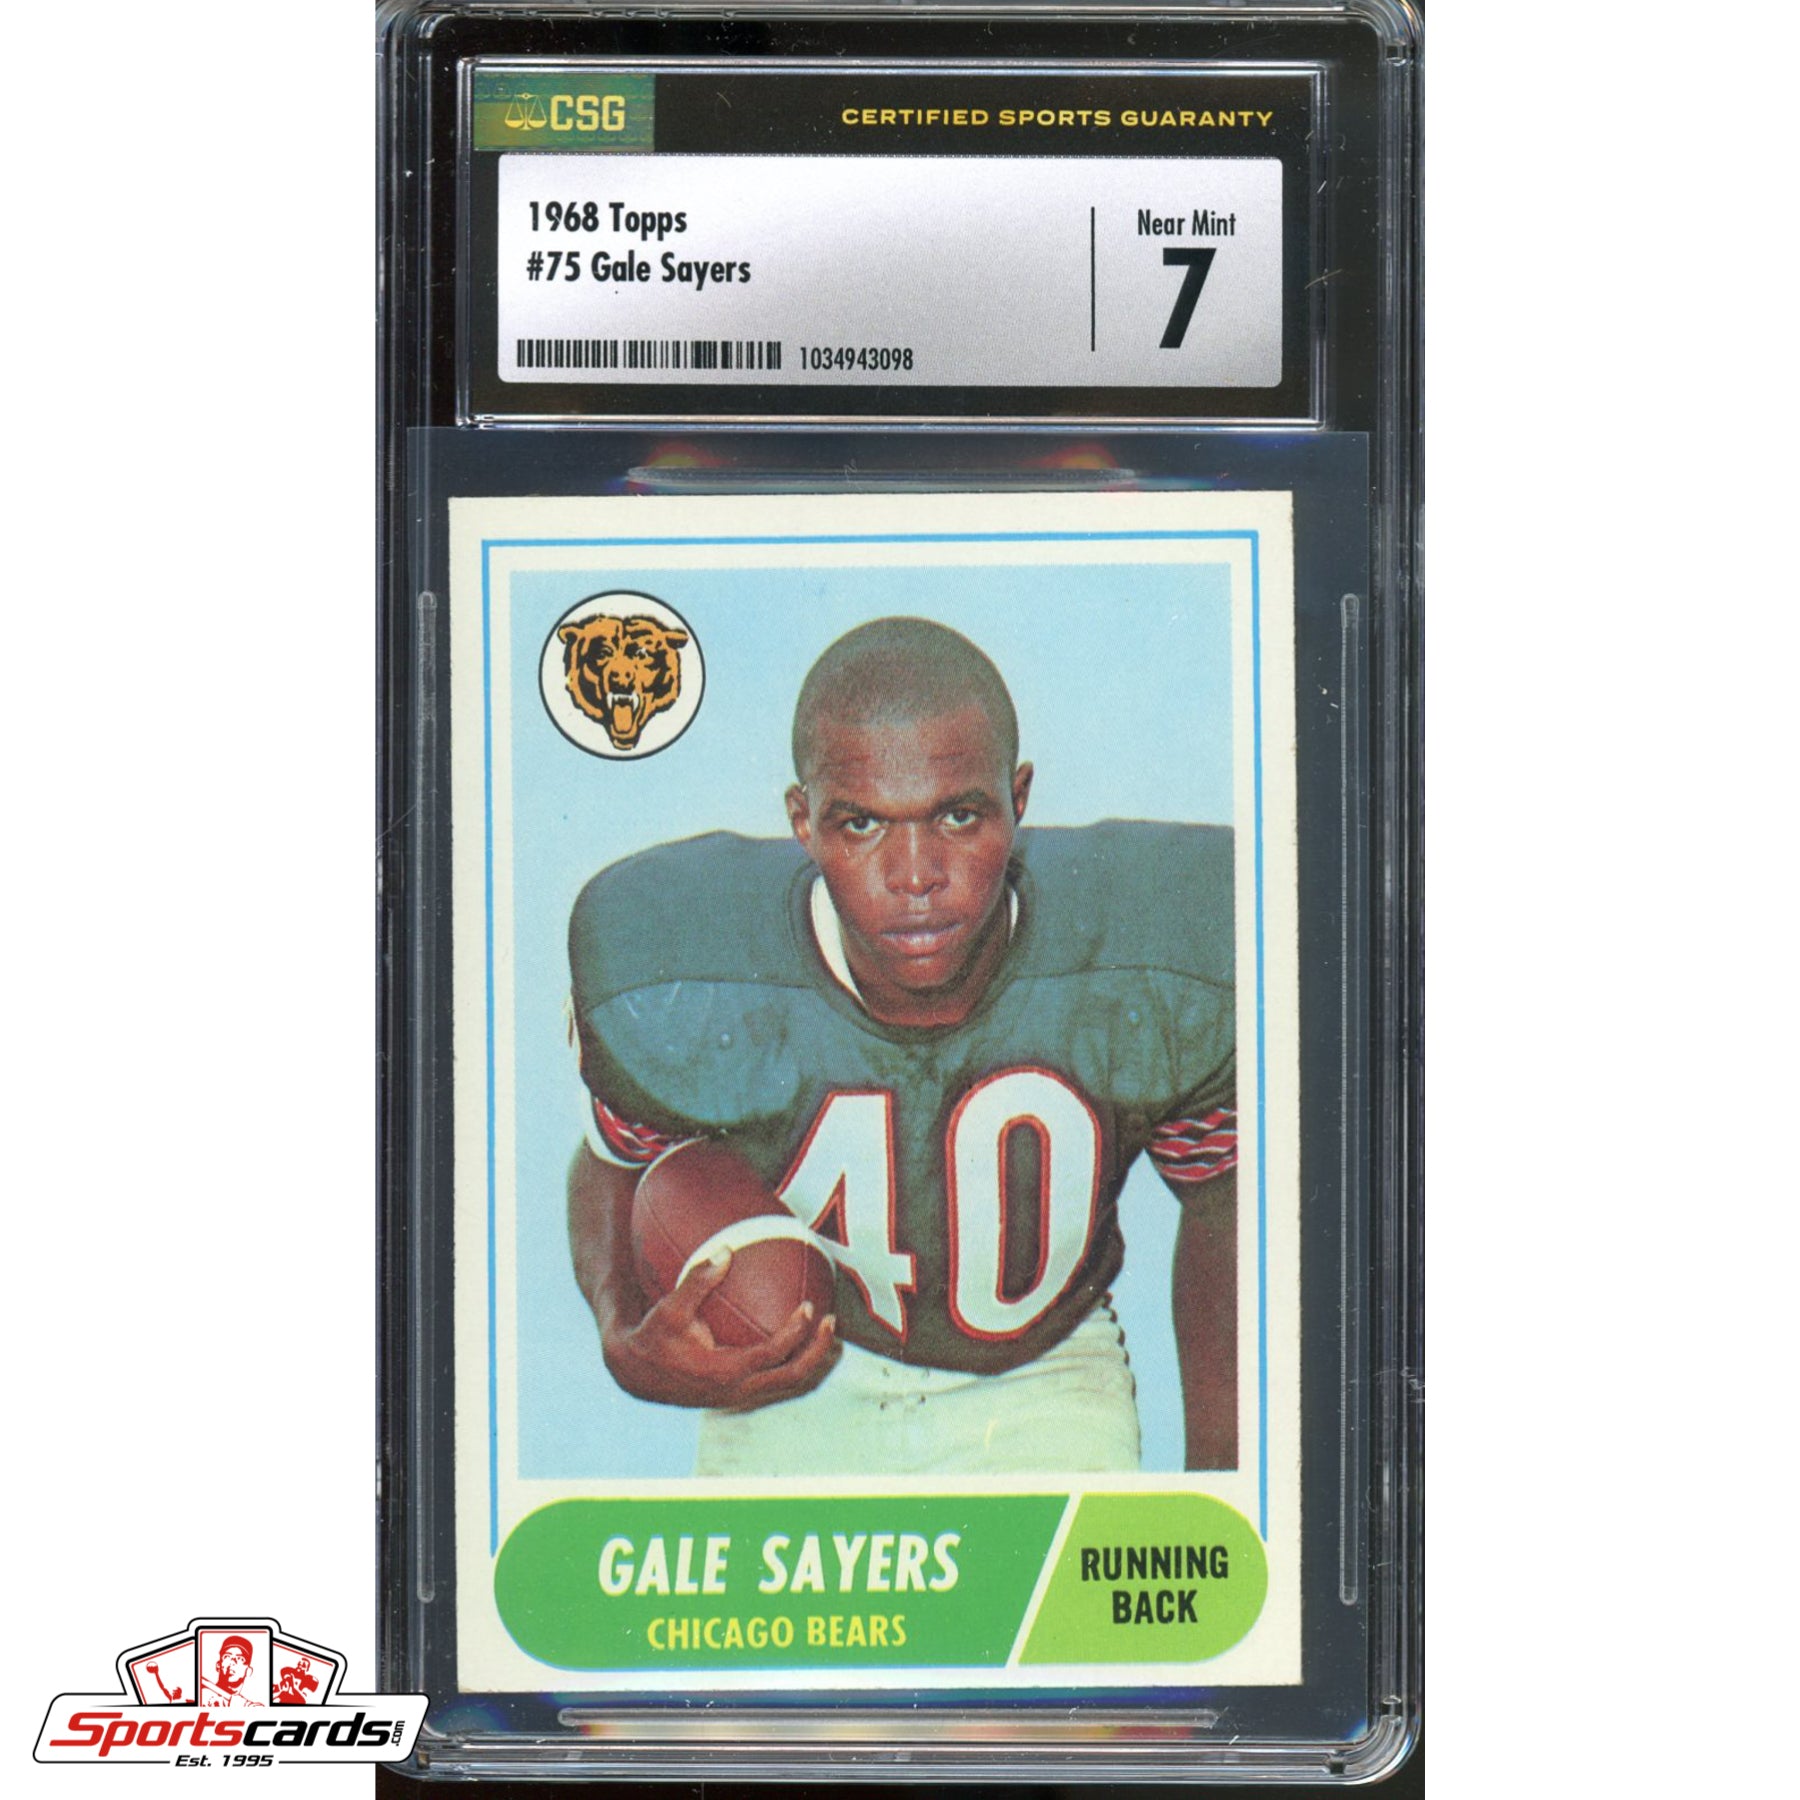 1968 Topps Gale Sayers #75 CSG Near Mint 7